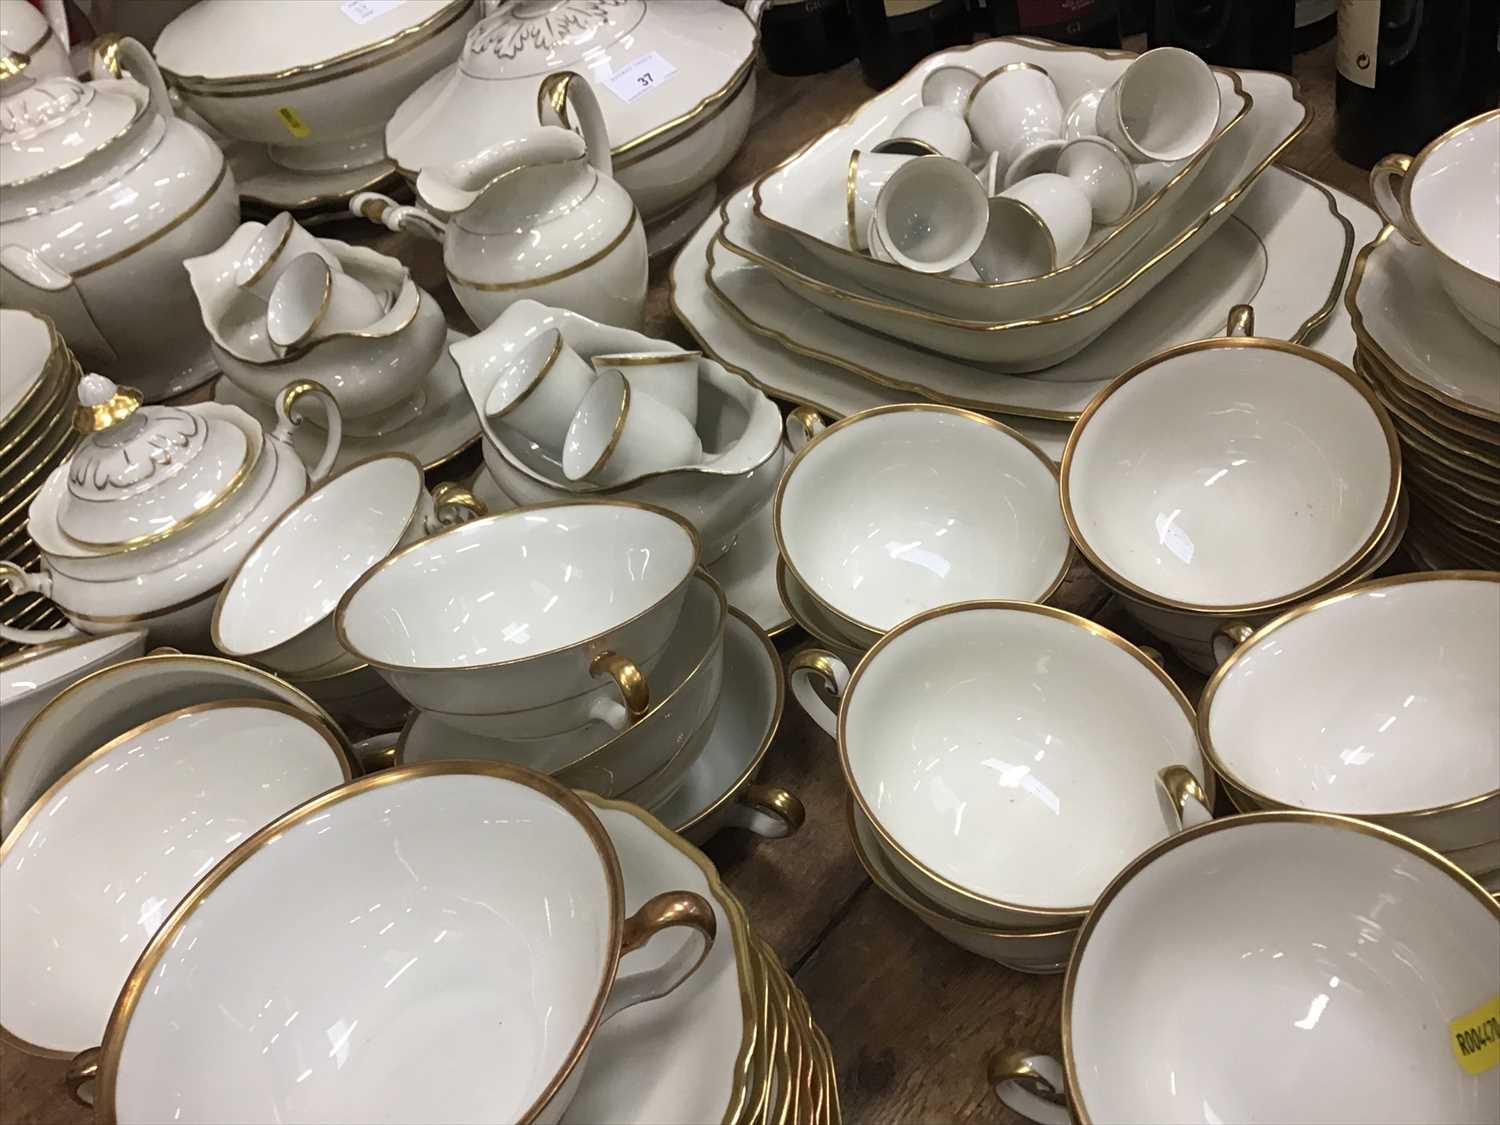 Lot 37 - An extensive German twelve place setting dinner and tea service with gold rims on cream ground